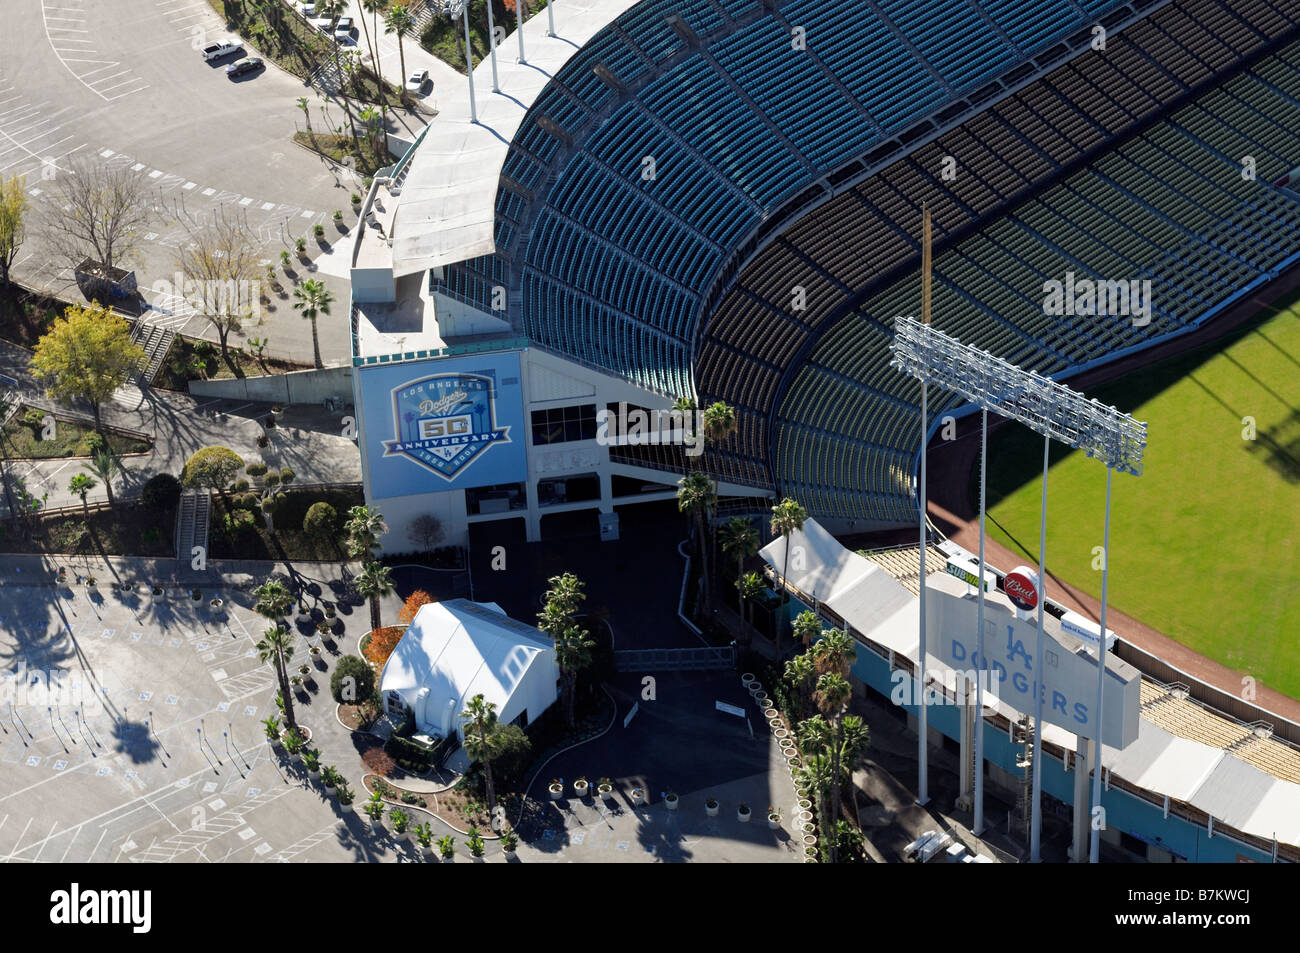 Aerial overhead view of the LA L.A. Los angeles dodgers baseball stadium high height pitch ground playing field Stock Photo